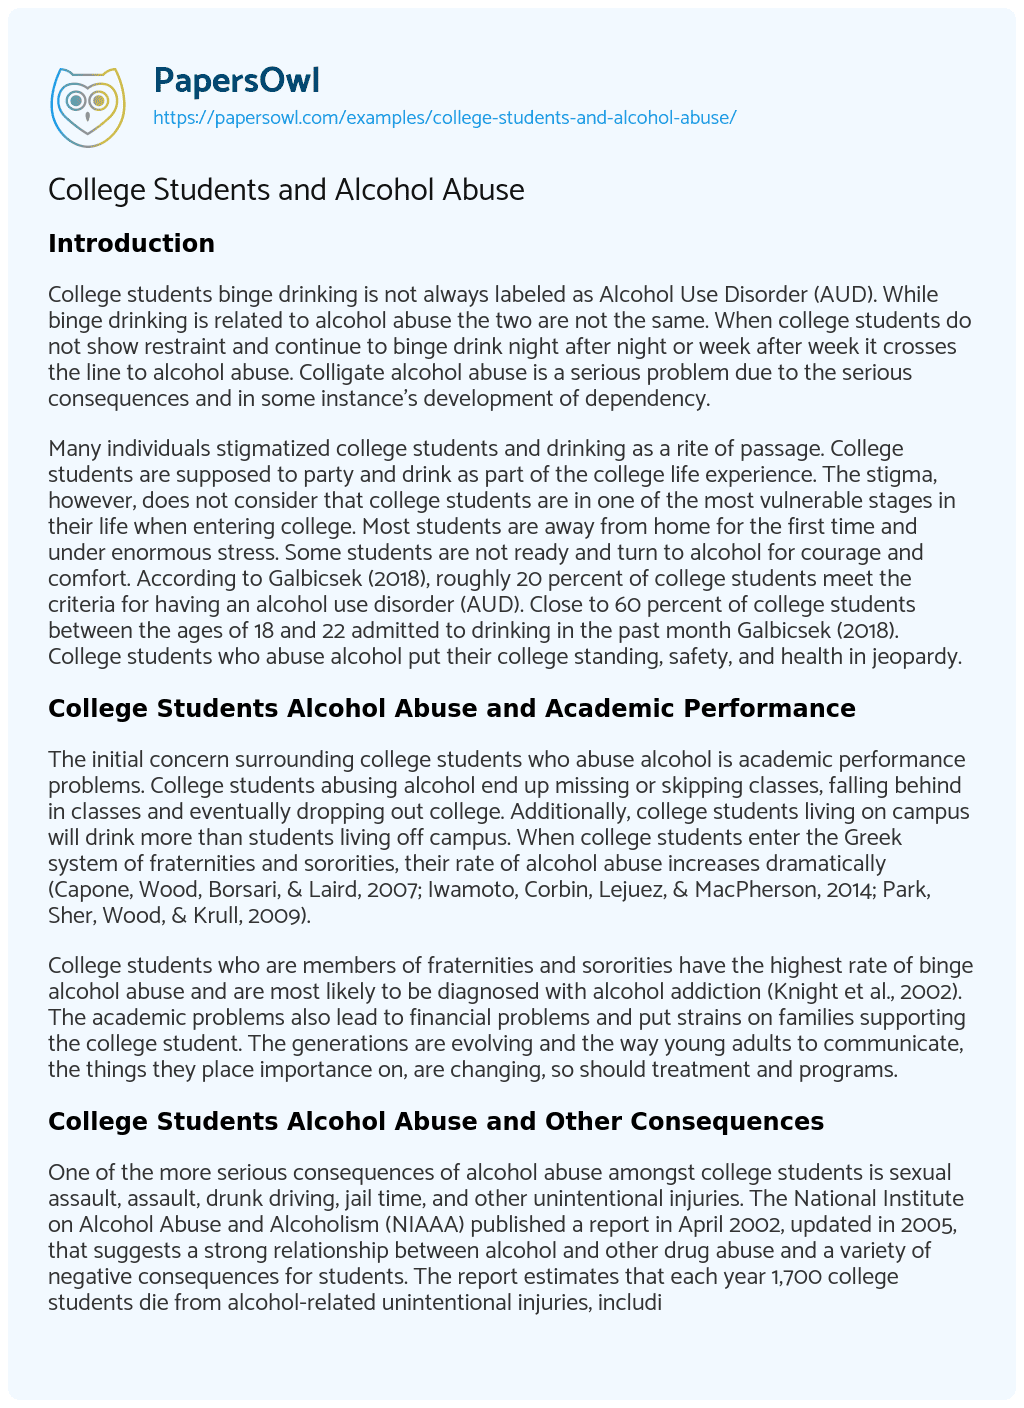 Essay on College Students and Alcohol Abuse